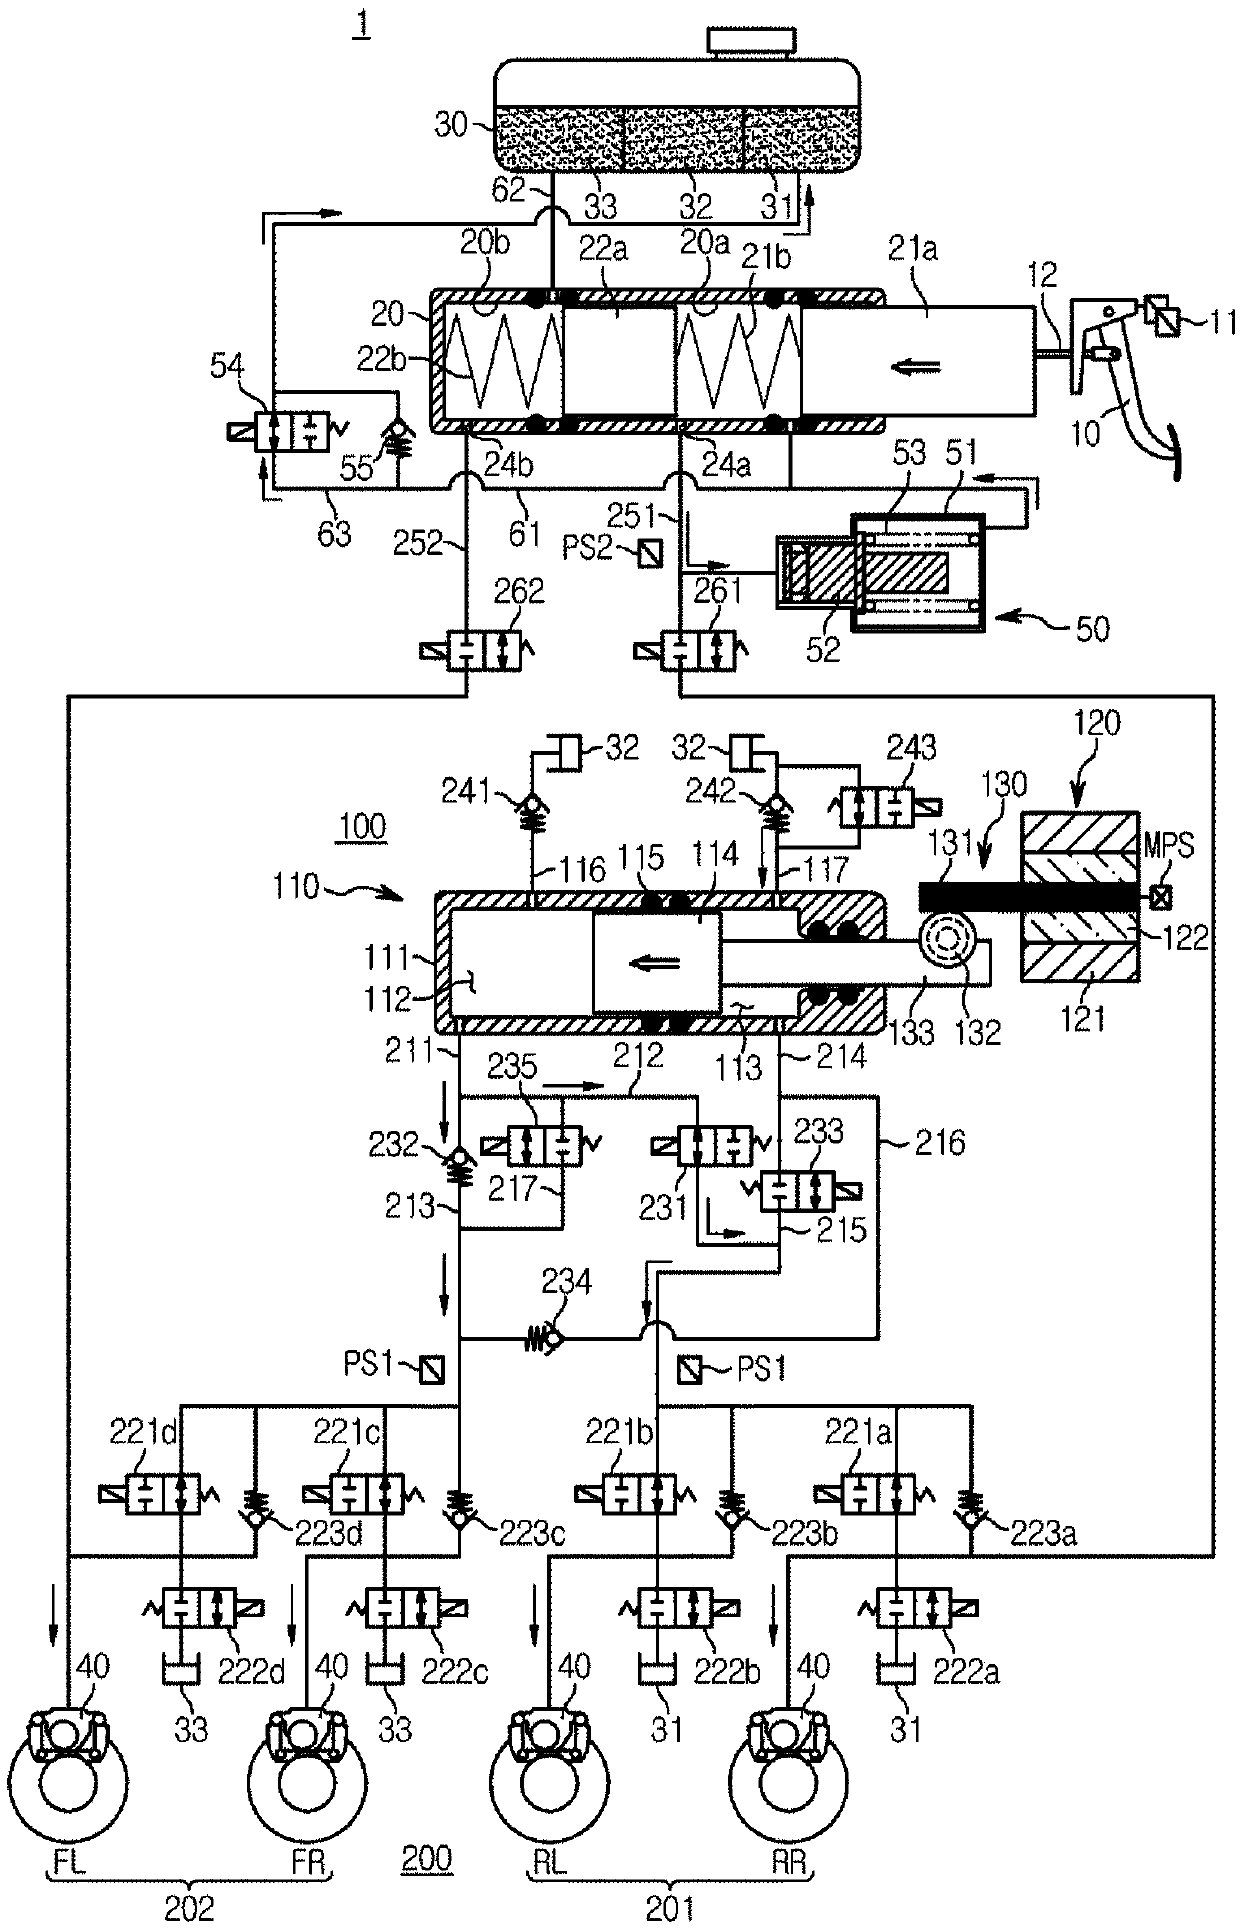 Electronic brake system and methods of operating the same